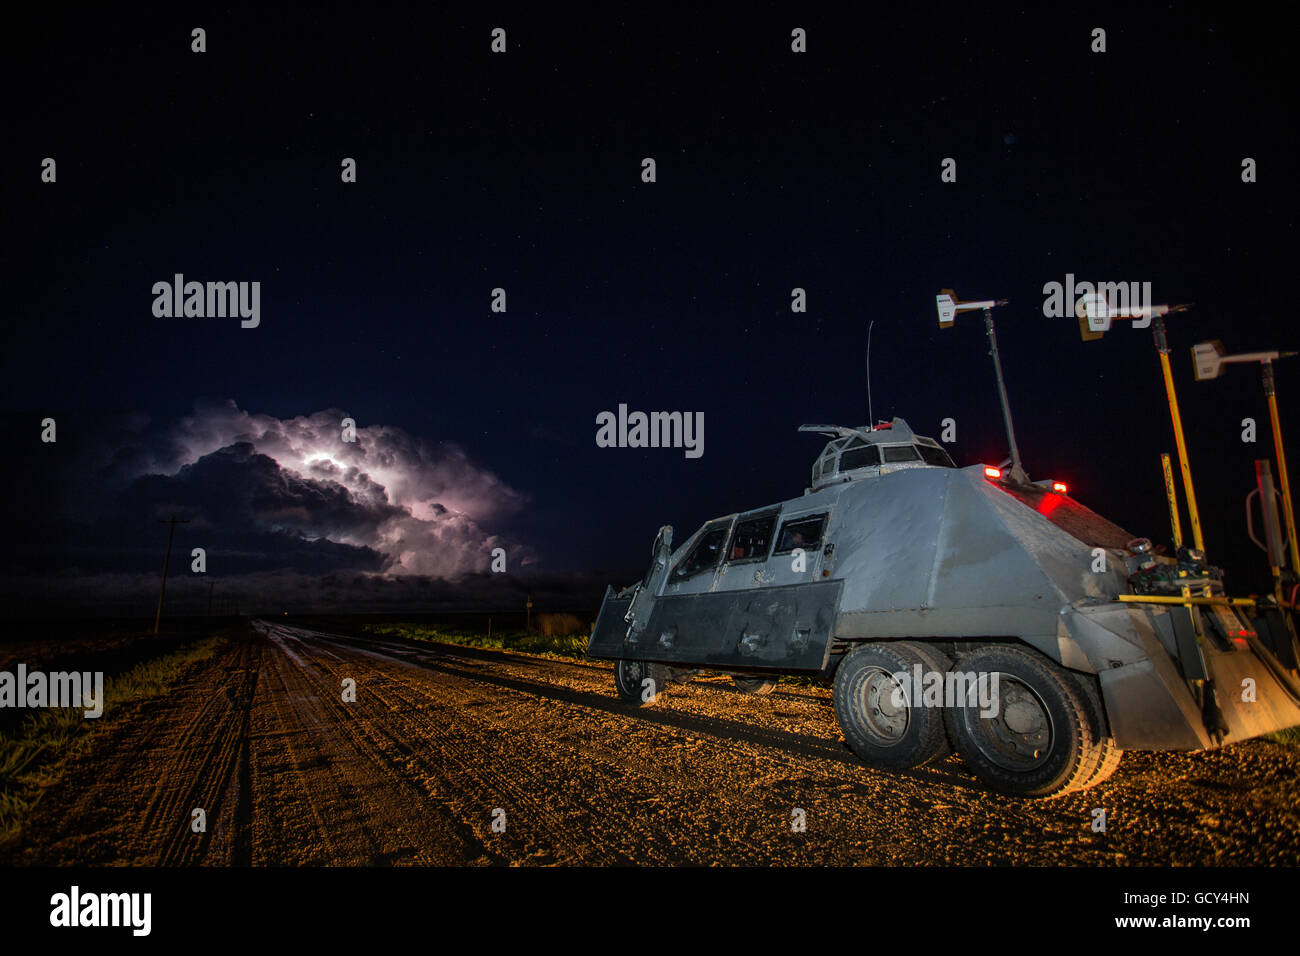 The storm chasers of the TIV 2 or 'Tornado Intercept Vehicle 2' prepare to drive towards a tornadic supercell at night. Stock Photo